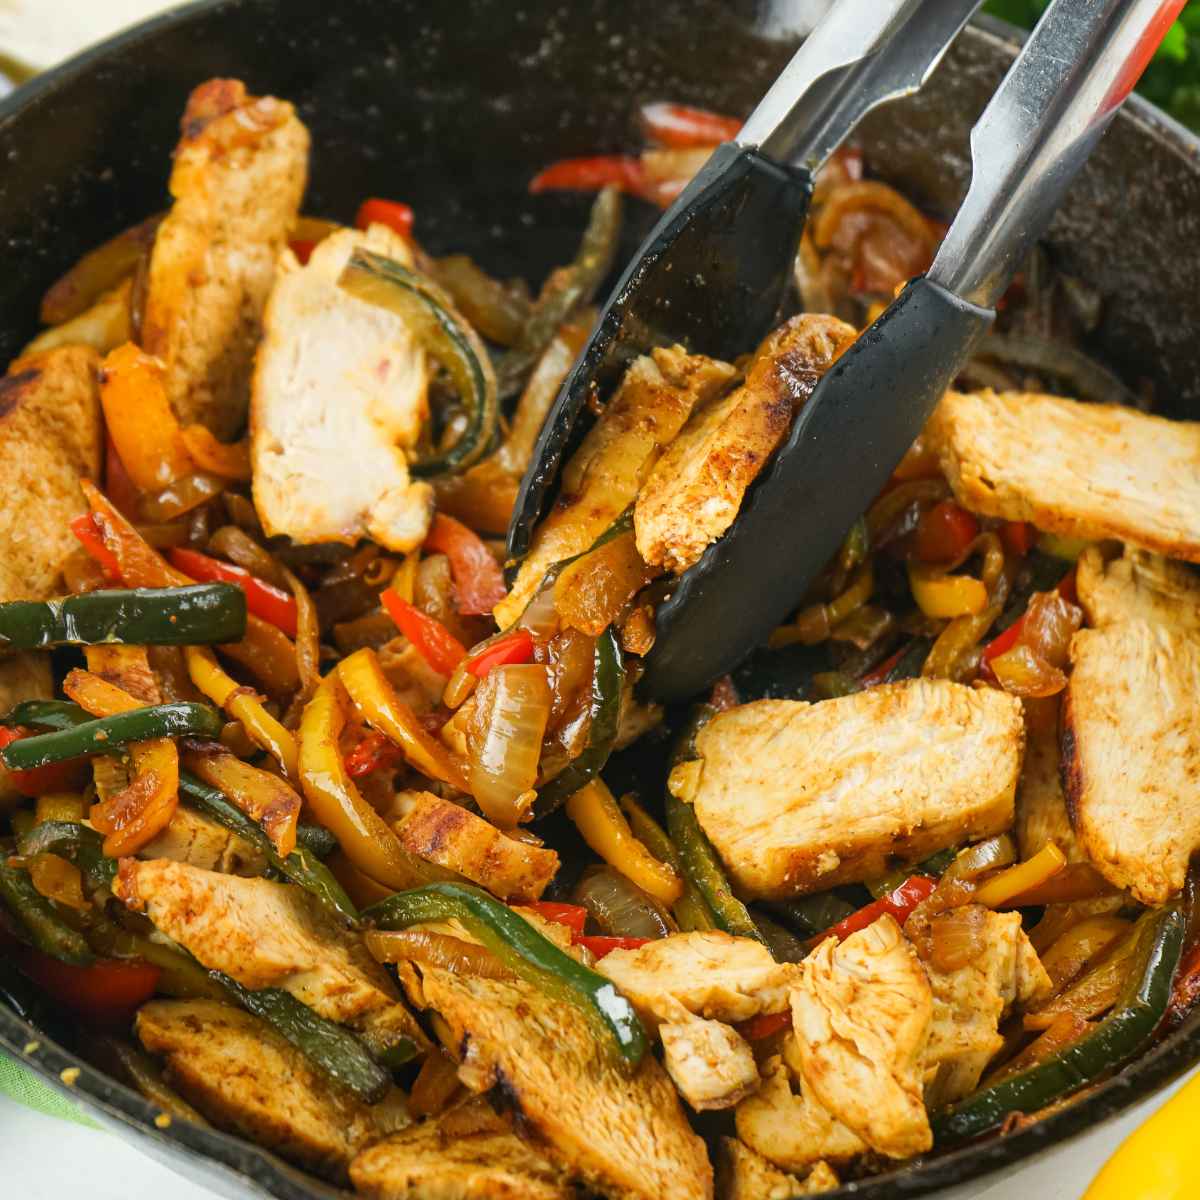 Quick and easy: How to cook fajitas in a skillet